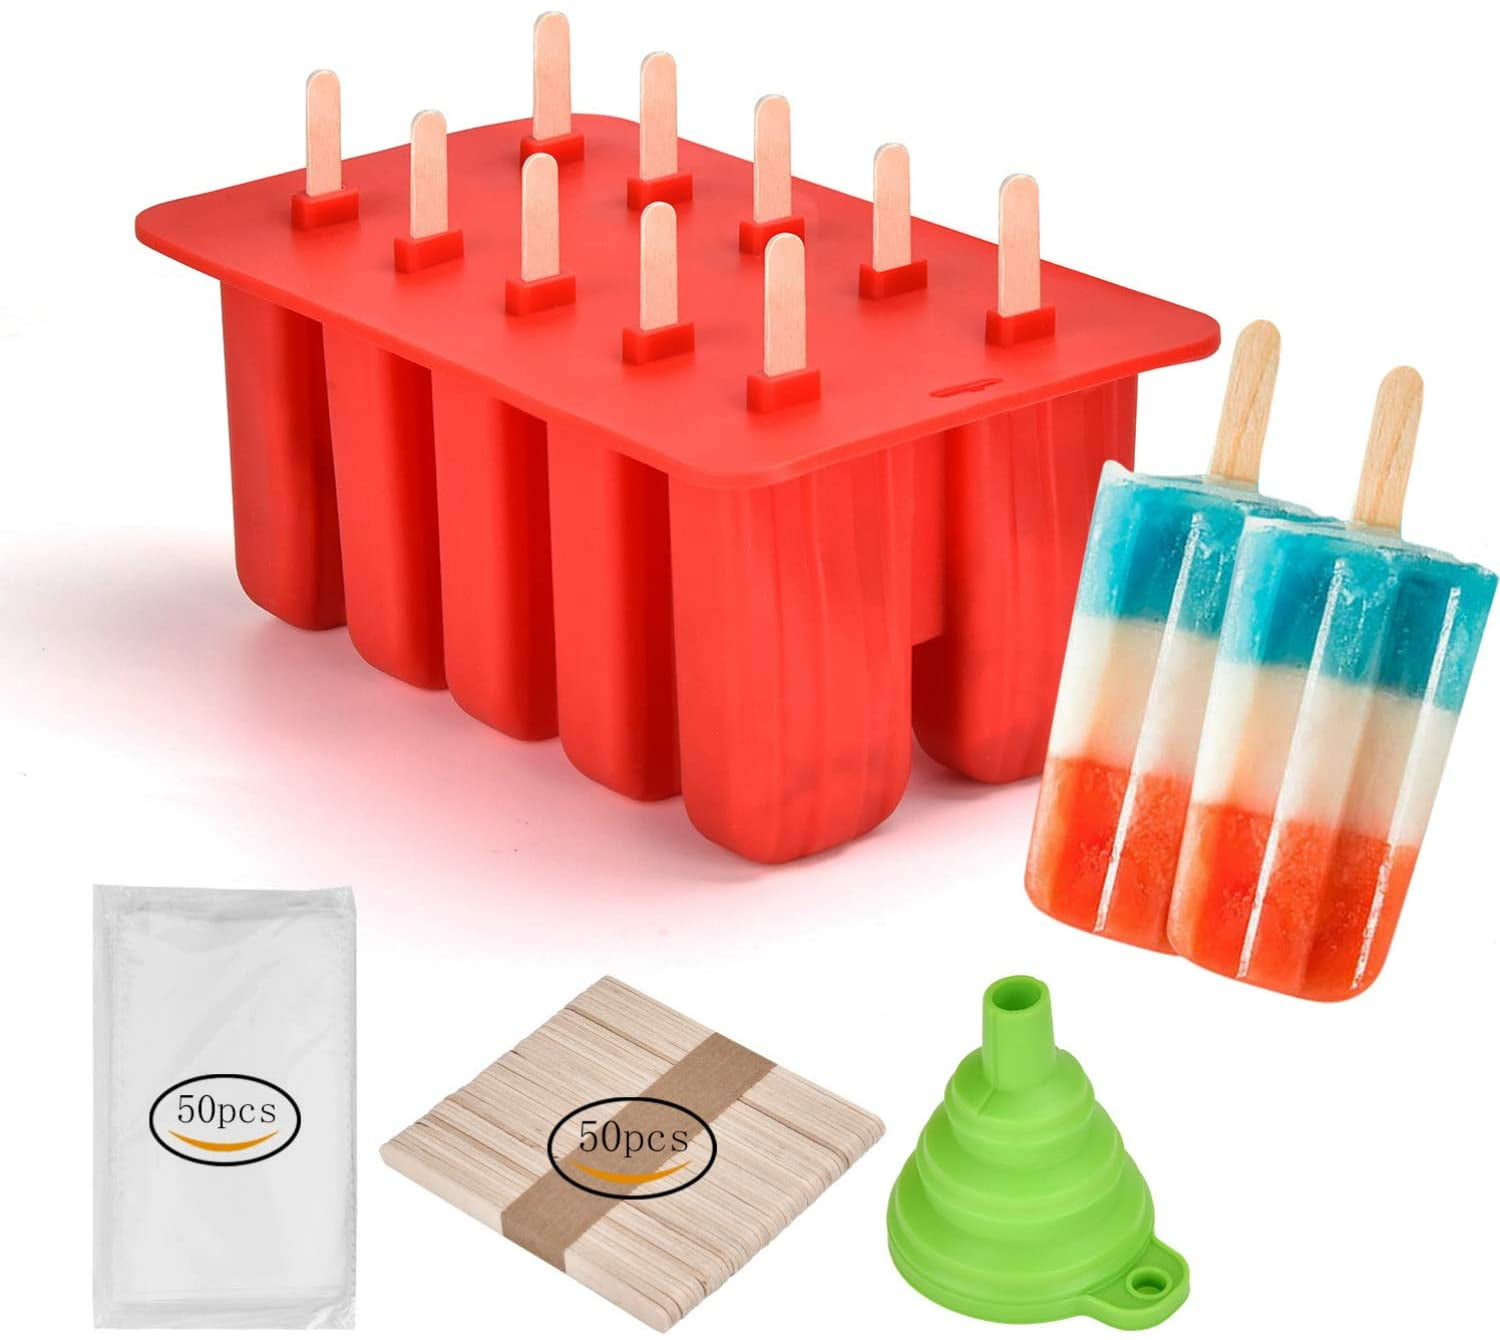 New Popsicle Molds Homemade Silicone Popsicle Molds,Popsicle Maker BPA Free Popcylce Molds,Reusable Popsicle Mold for Kids,Ice Cream Mold,Ice Pop Molds Maker with 50 Popsicles Sticks,Popsicle Bags 